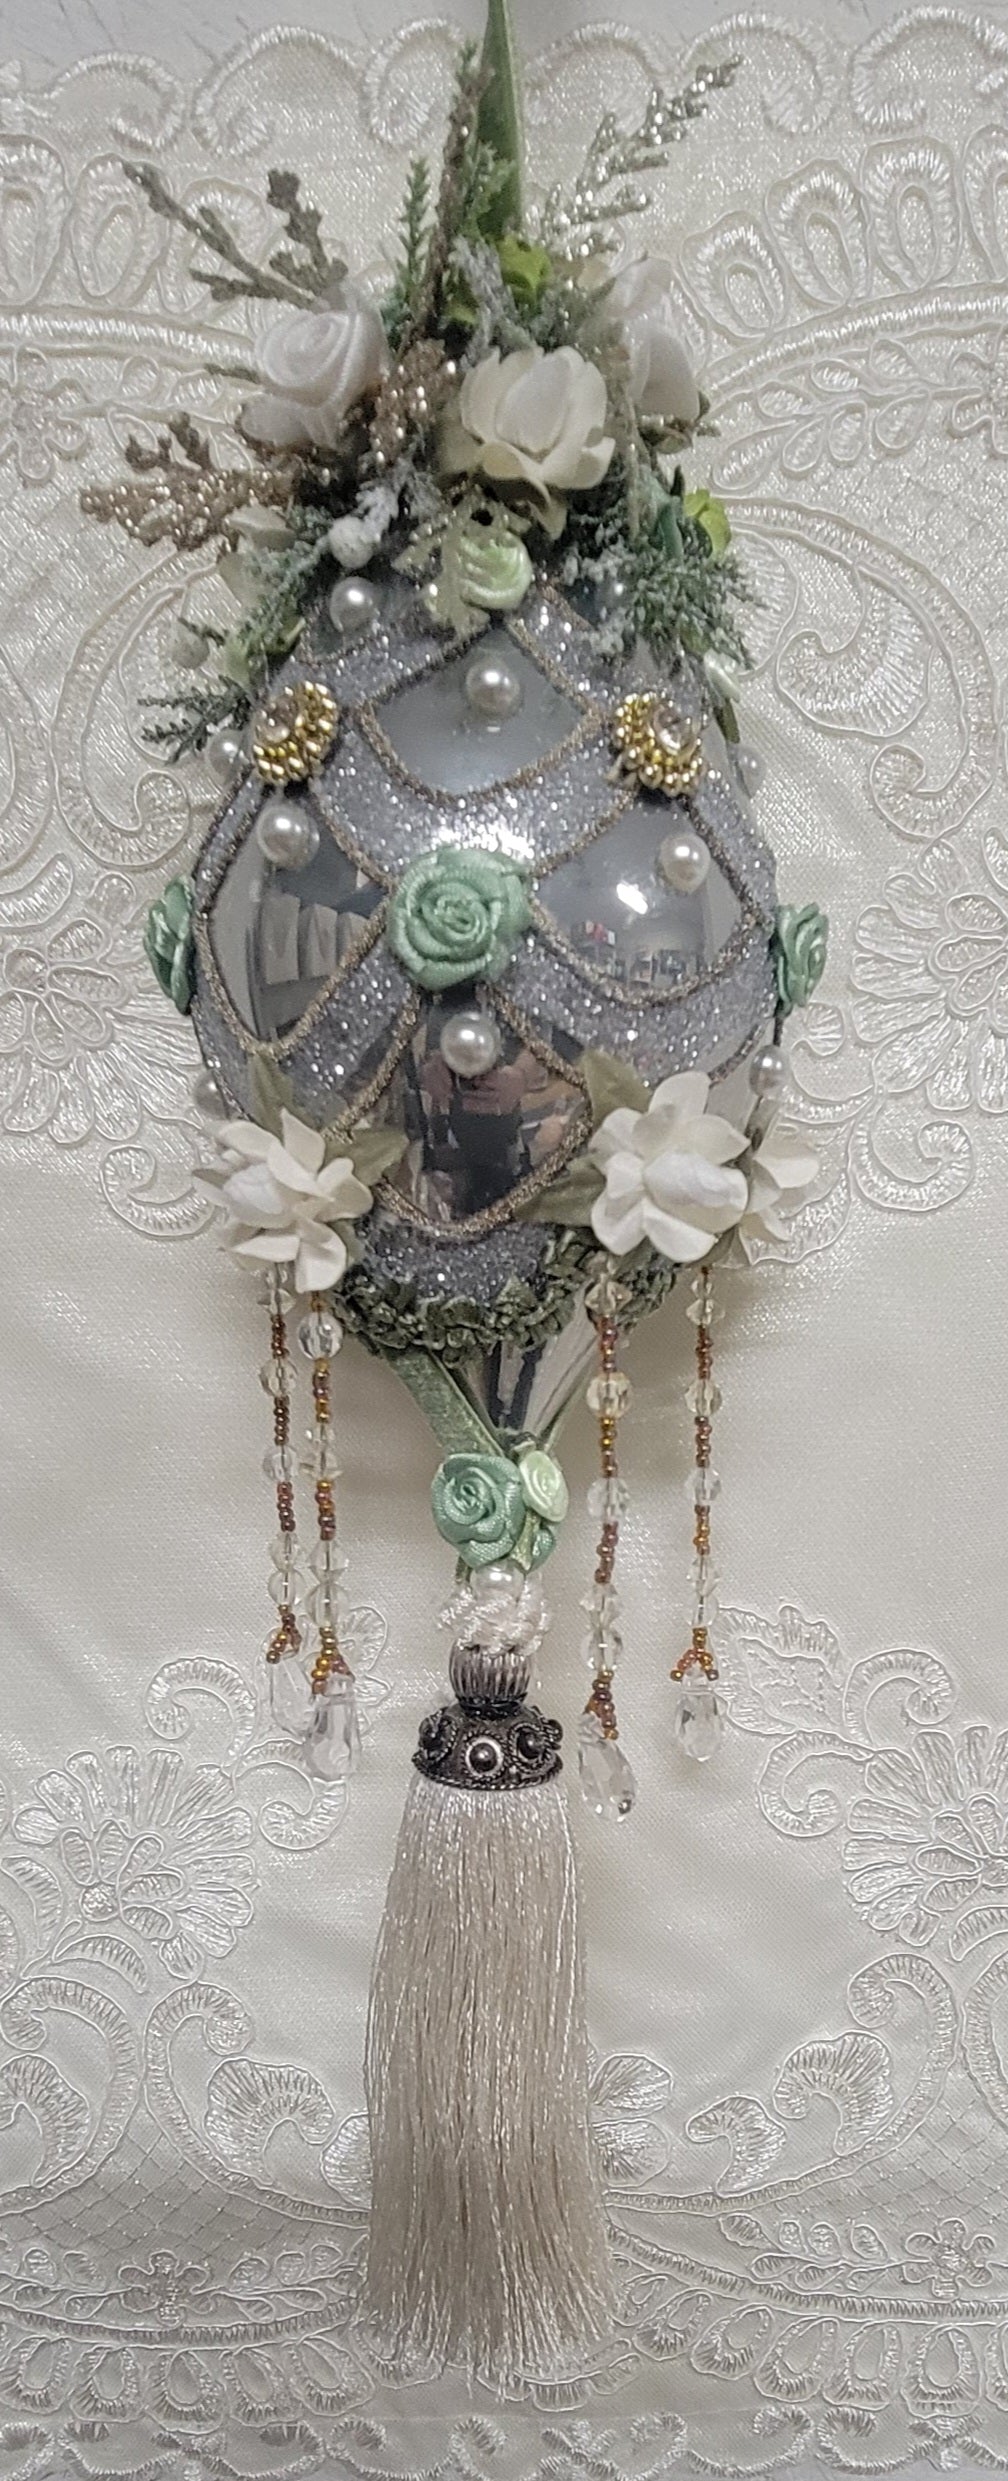 Evergreen Folly with Tassel Hand Decorated Victorian Iridescent Glass Ornament - One of a Kind!-Roses And Teacups